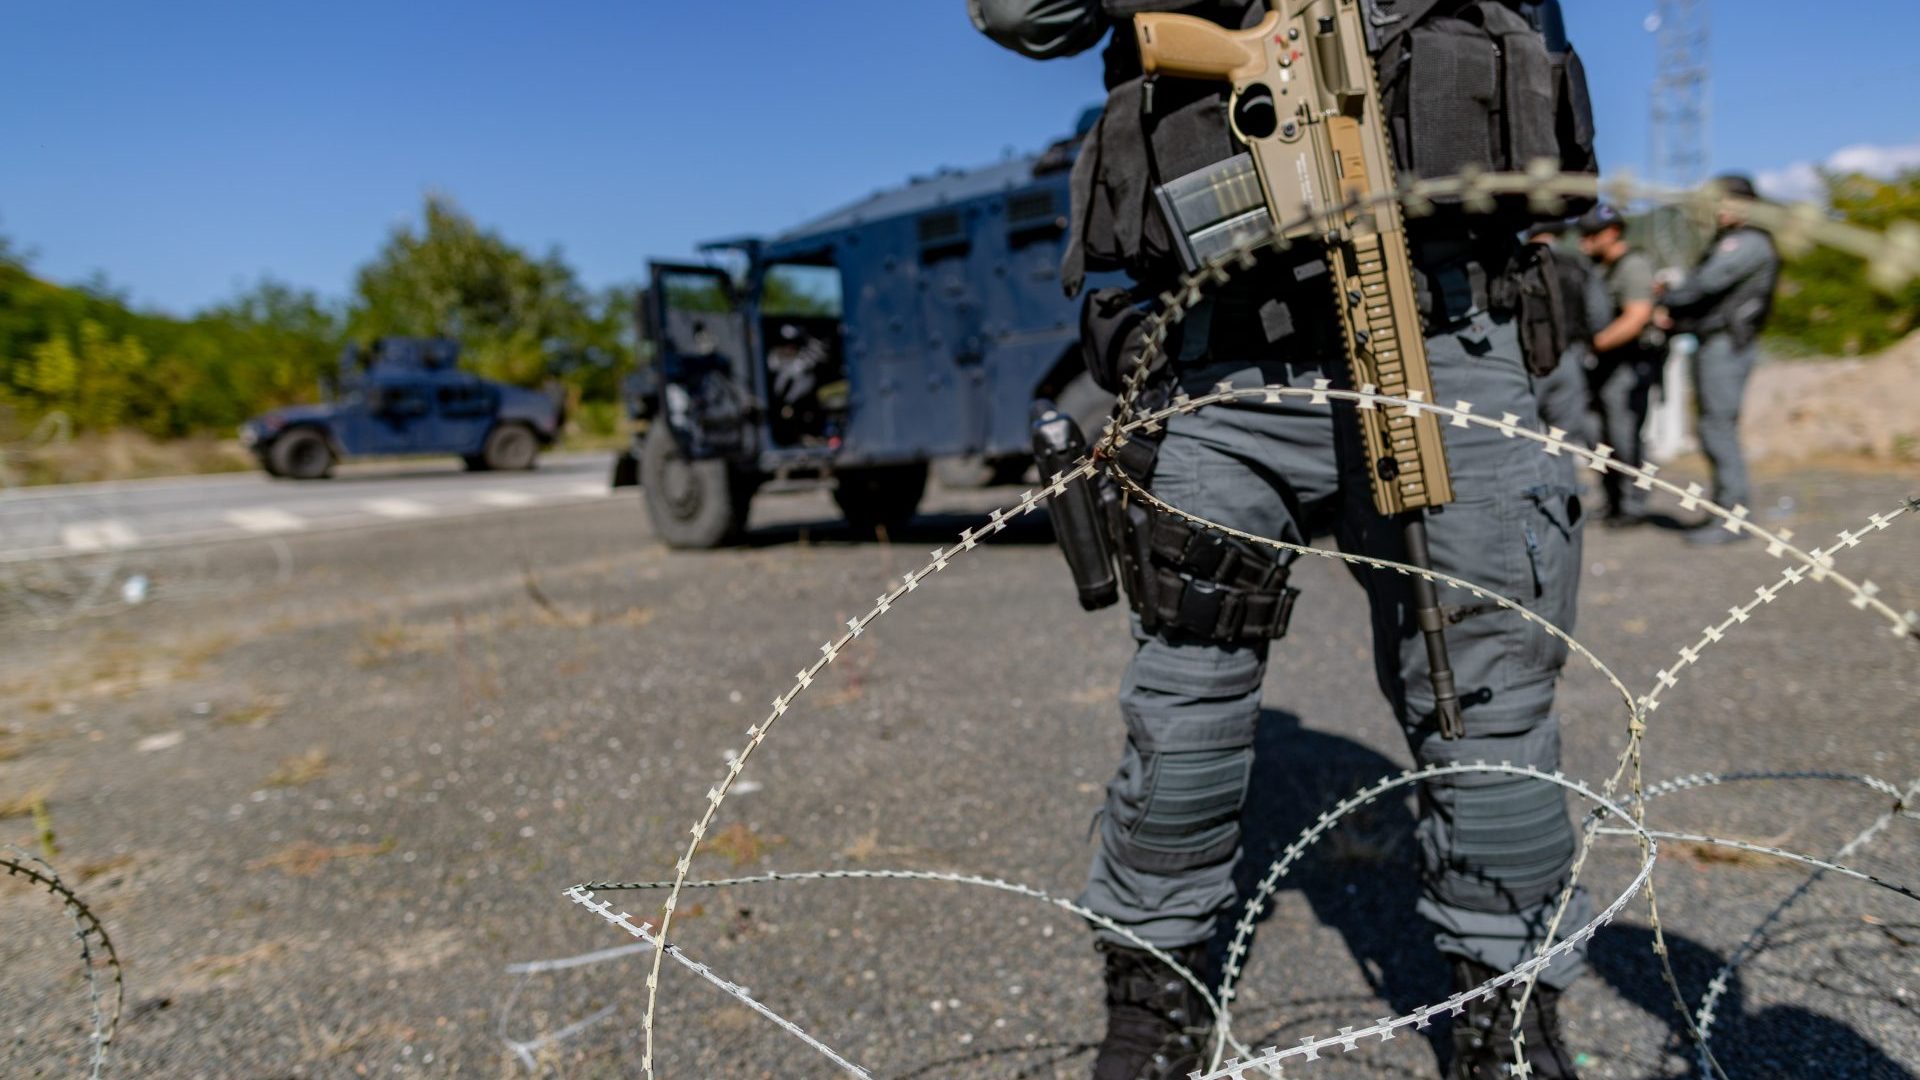 Kosovo Police continue to uphold security with search, patrol and control activities in the north of the country (Photo by Vudi Xhymshiti/Anadolu Agency via Getty Images)